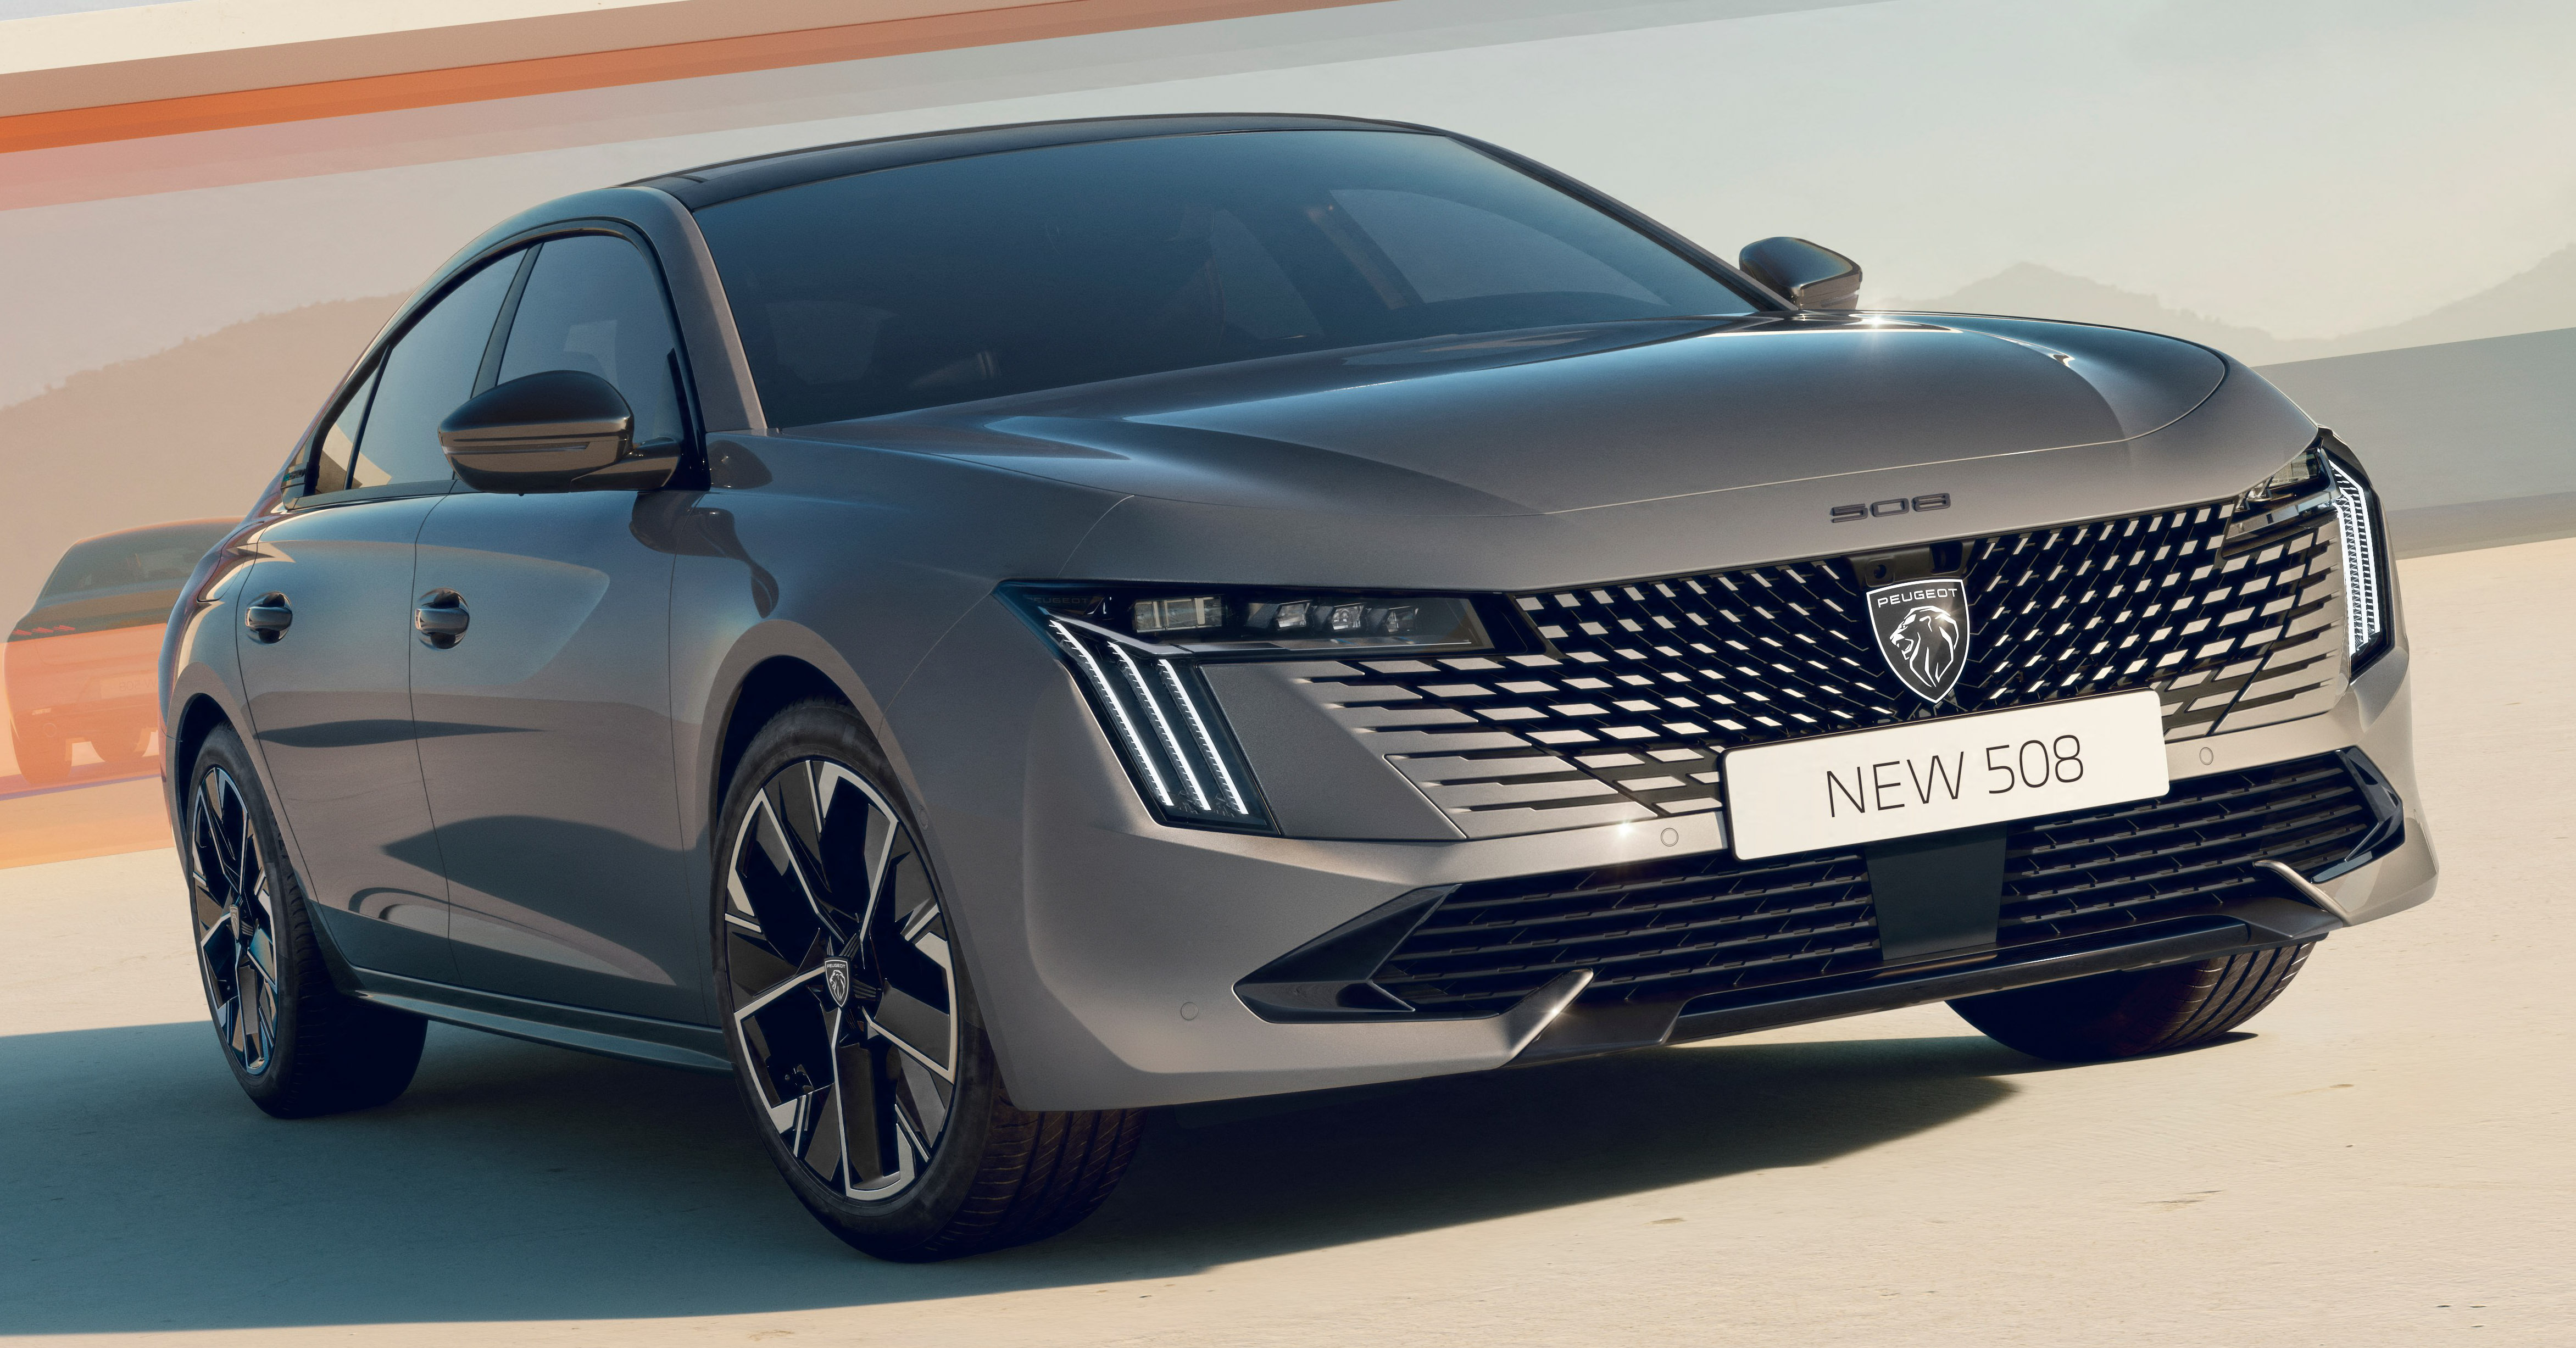 2023 Peugeot 508 facelift debuts - restyled exterior and interior; new  infotainment; PHEV, ICE powertrains 